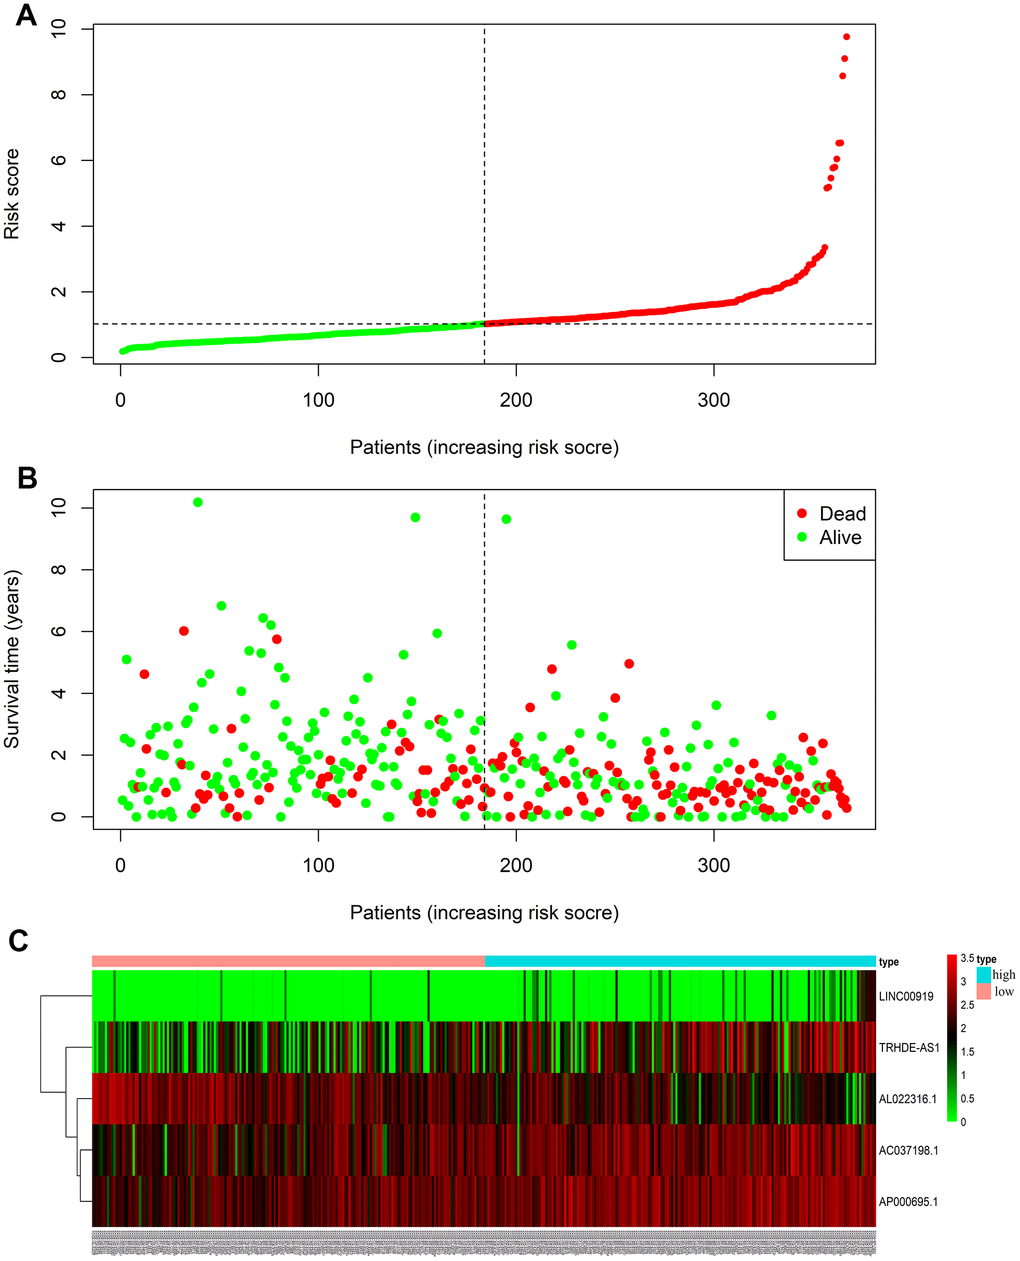 LncRNA predictive risk-score analysis of GC patients in TCGA database (The black dotted line represents the median signature cut-off dividing patients into low- and high-risk groups). (A) LncRNA risk score distribution in low- and high-risk groups (The green dots represent the low-risk patients, and red means the high-risk group). (B) The survival status and time of GC patients in low- and high-risk groups (The green dots represent alive, and red means dead). (C) Heatmap of the five-lncRNA expression profiles in GC patients.